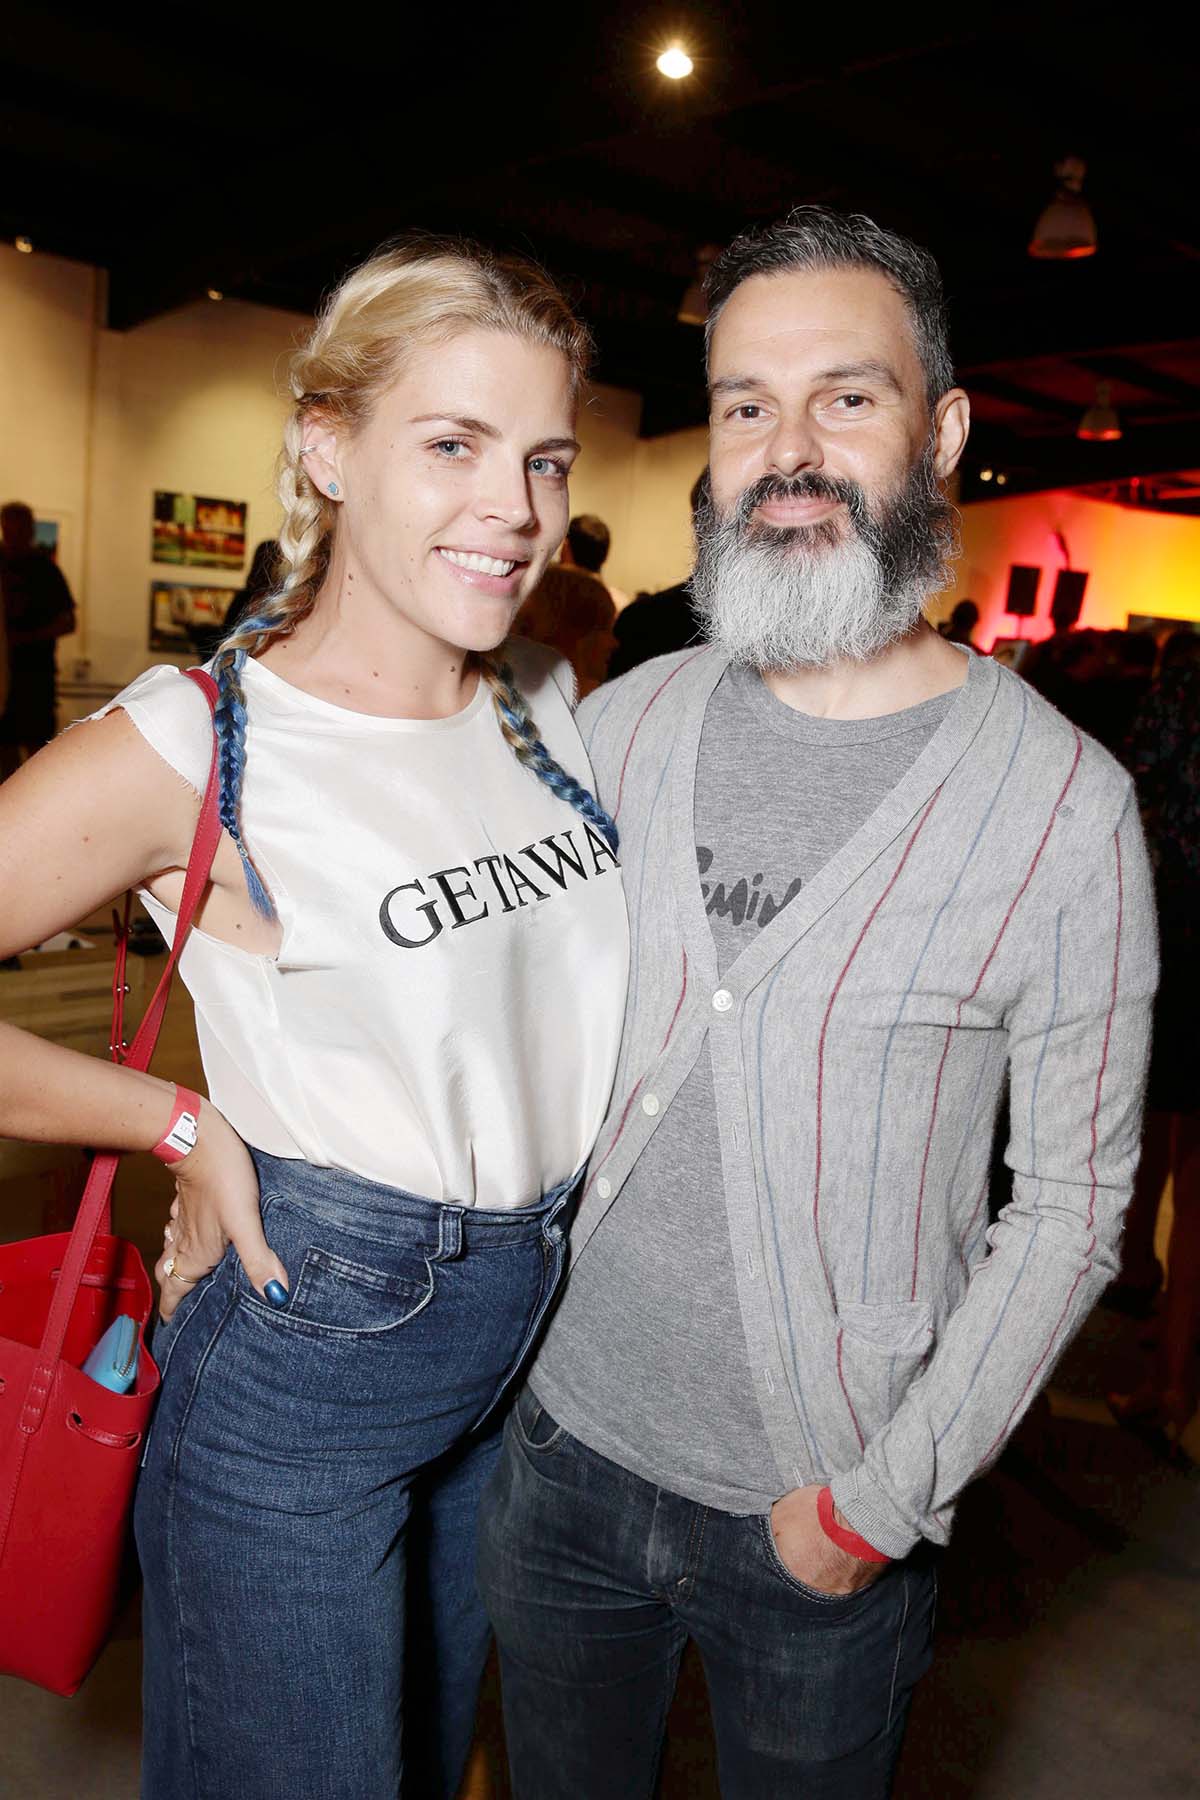 Busy Philipps Marc Silverstein The Way They Were